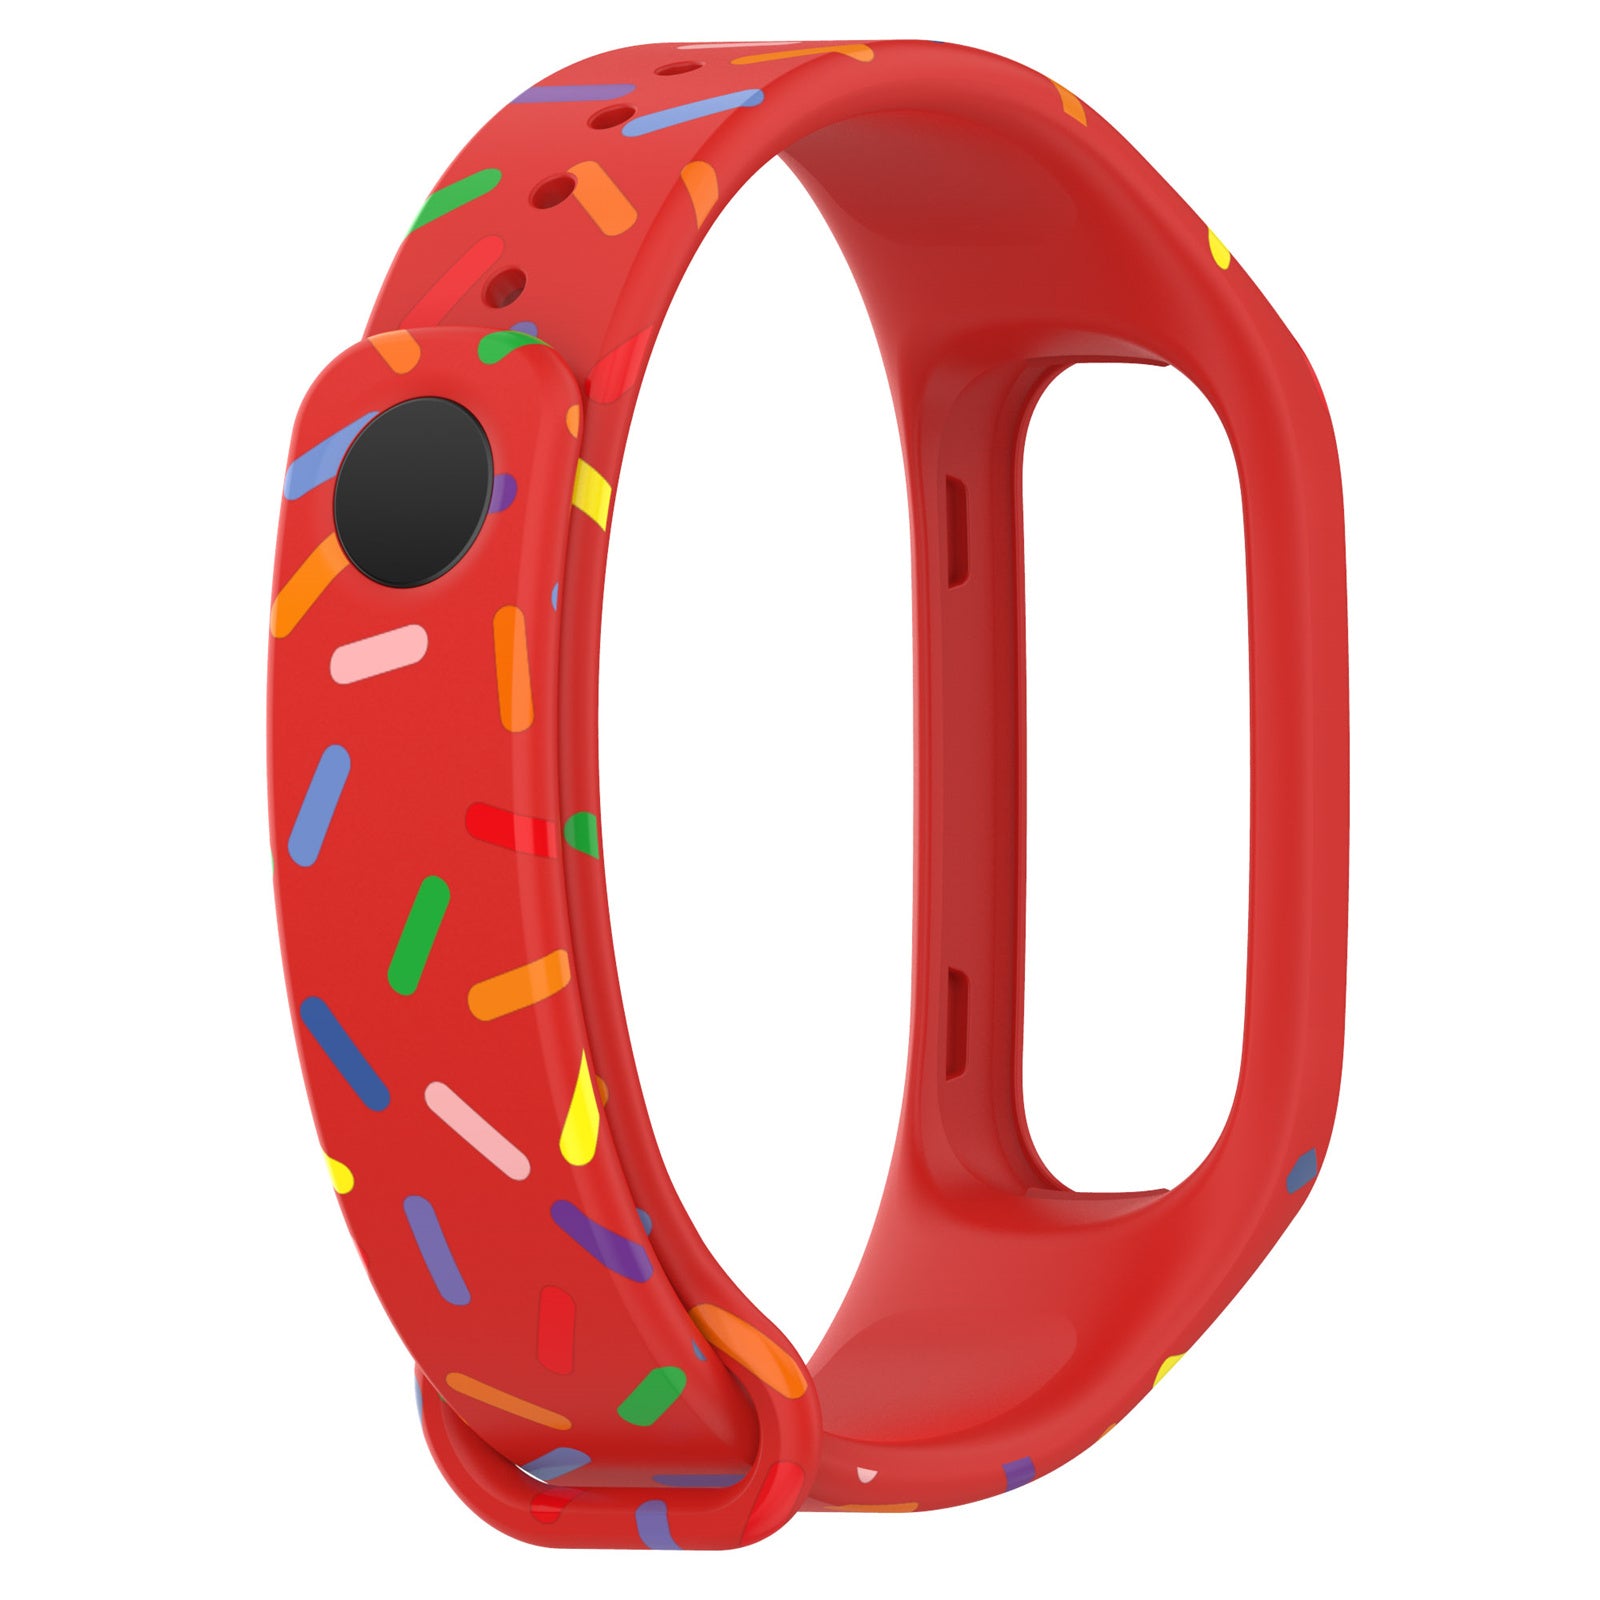 Uniqkart for Oppo Band Integrated Silicone Strap Watch Case Colorful Spotted Wrist Band - Red